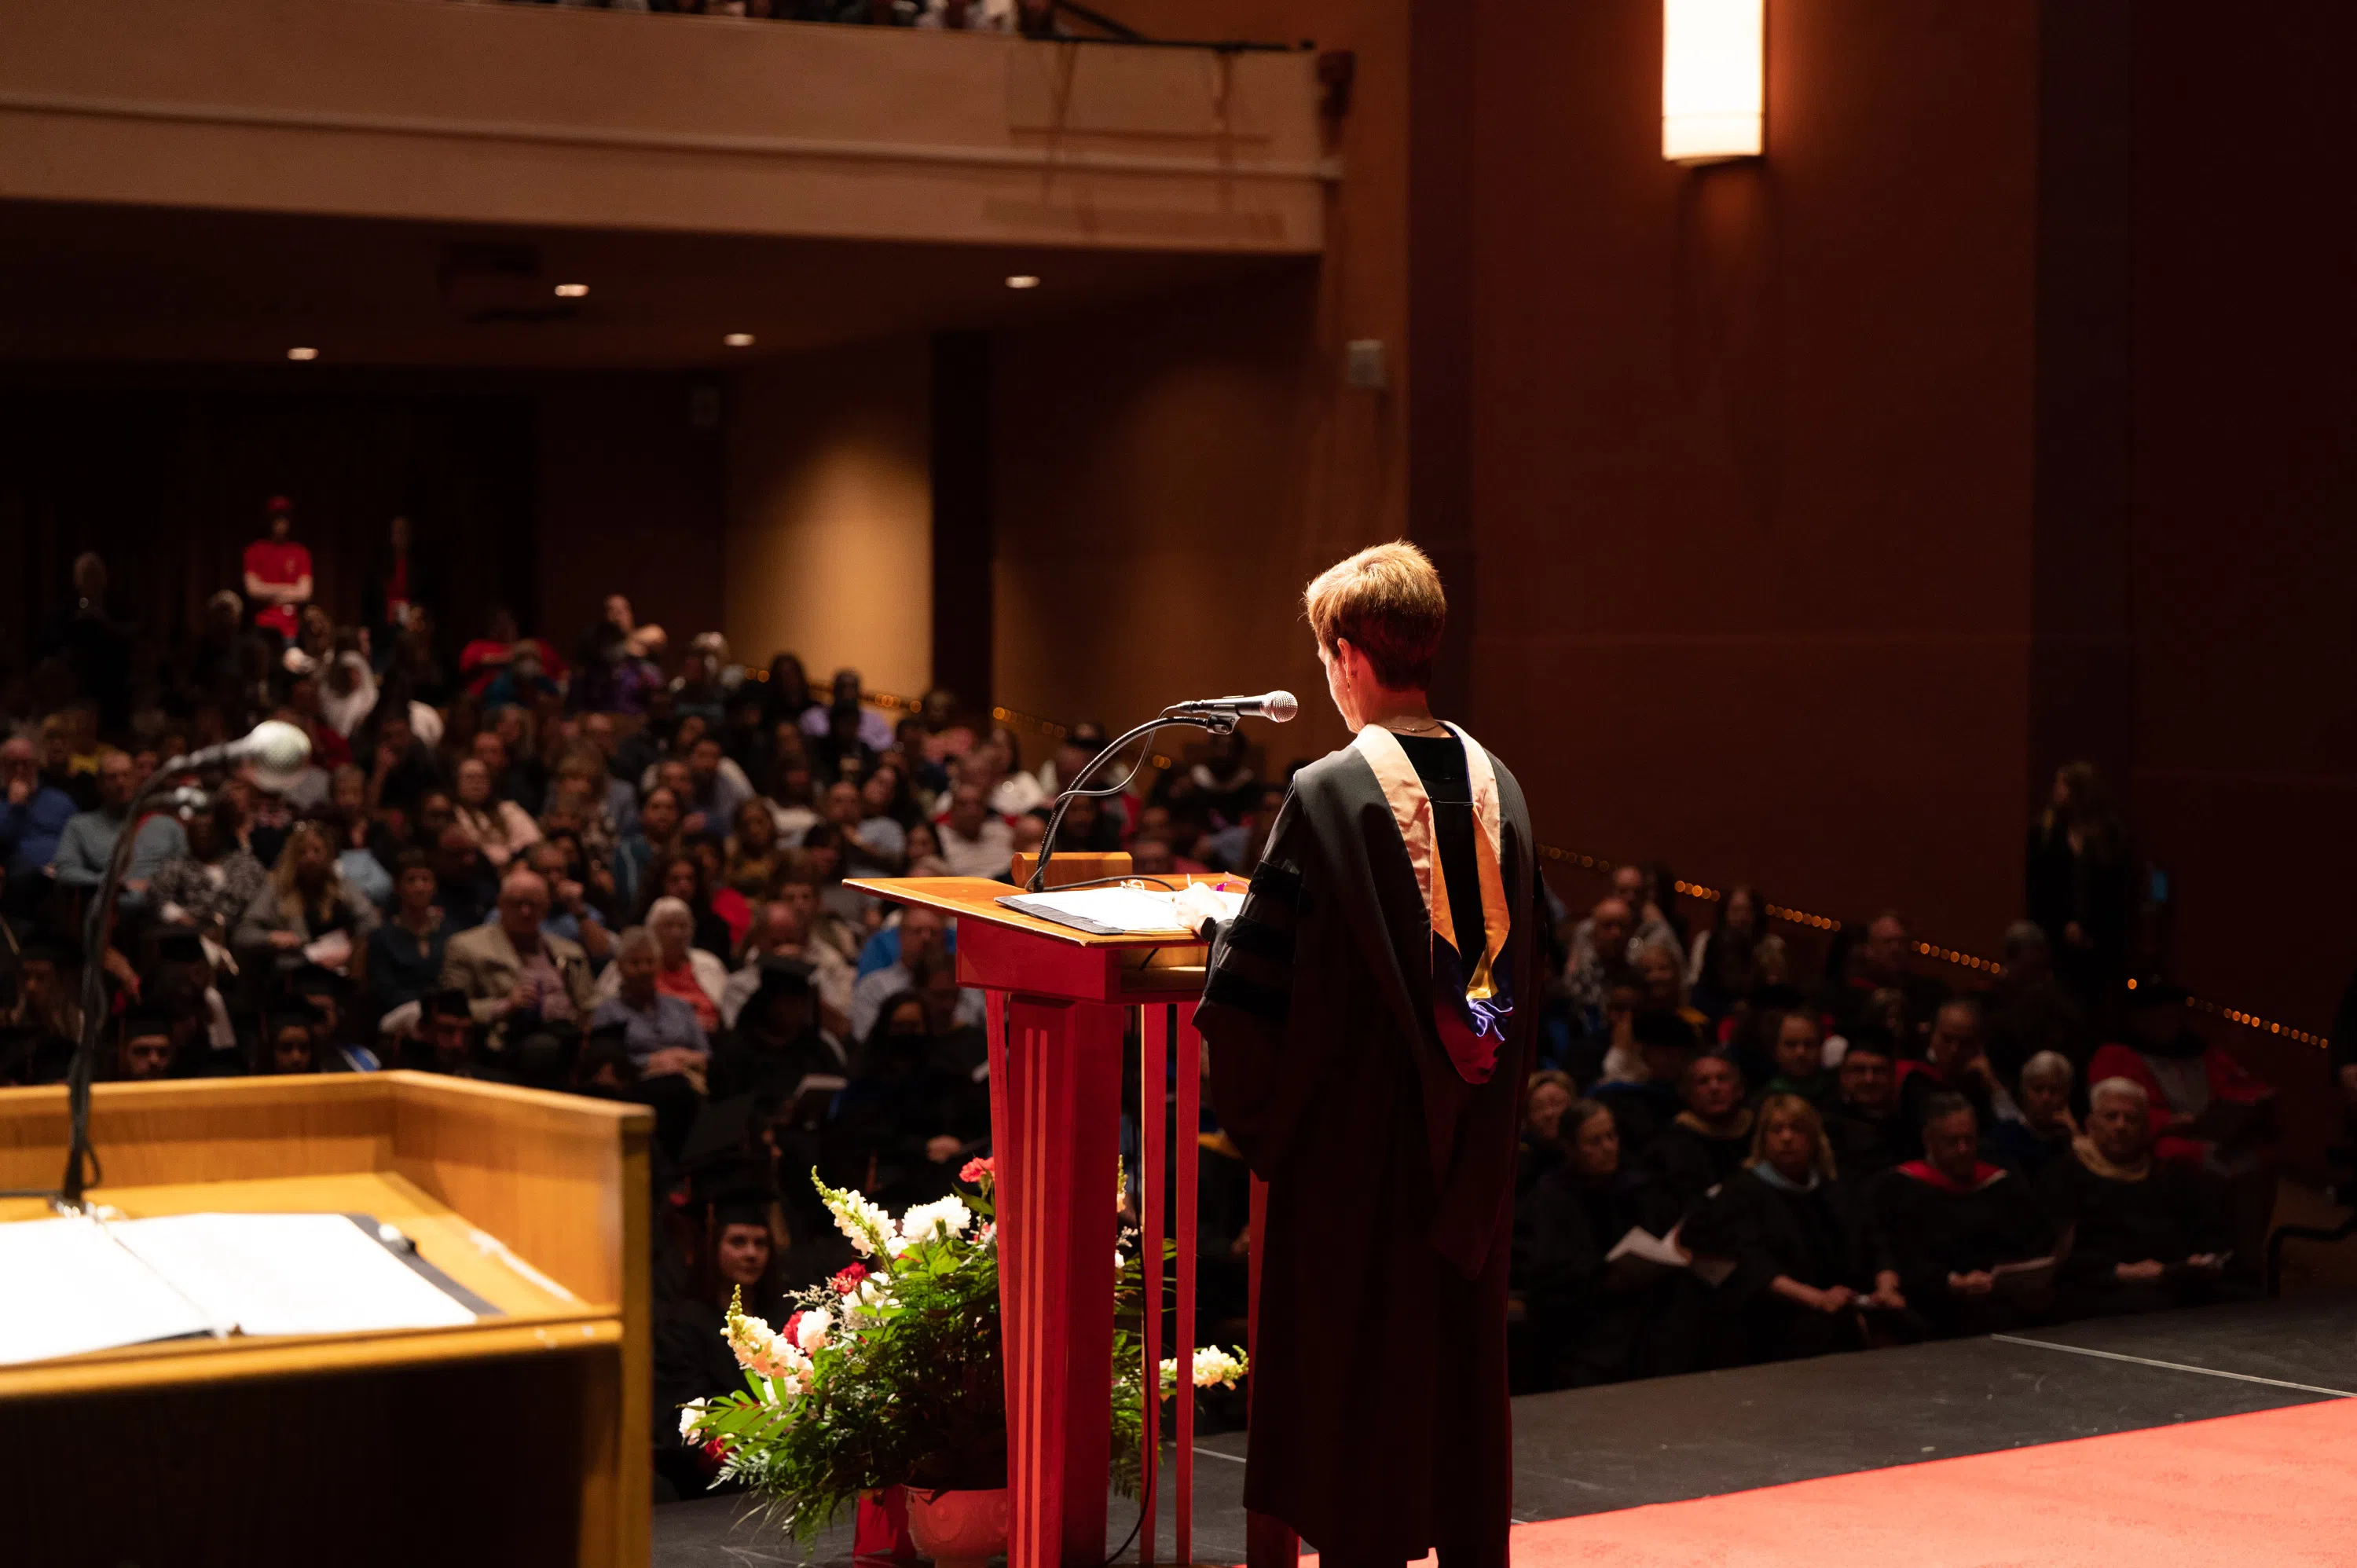 A person is giving a speech to a large audience at commencement.